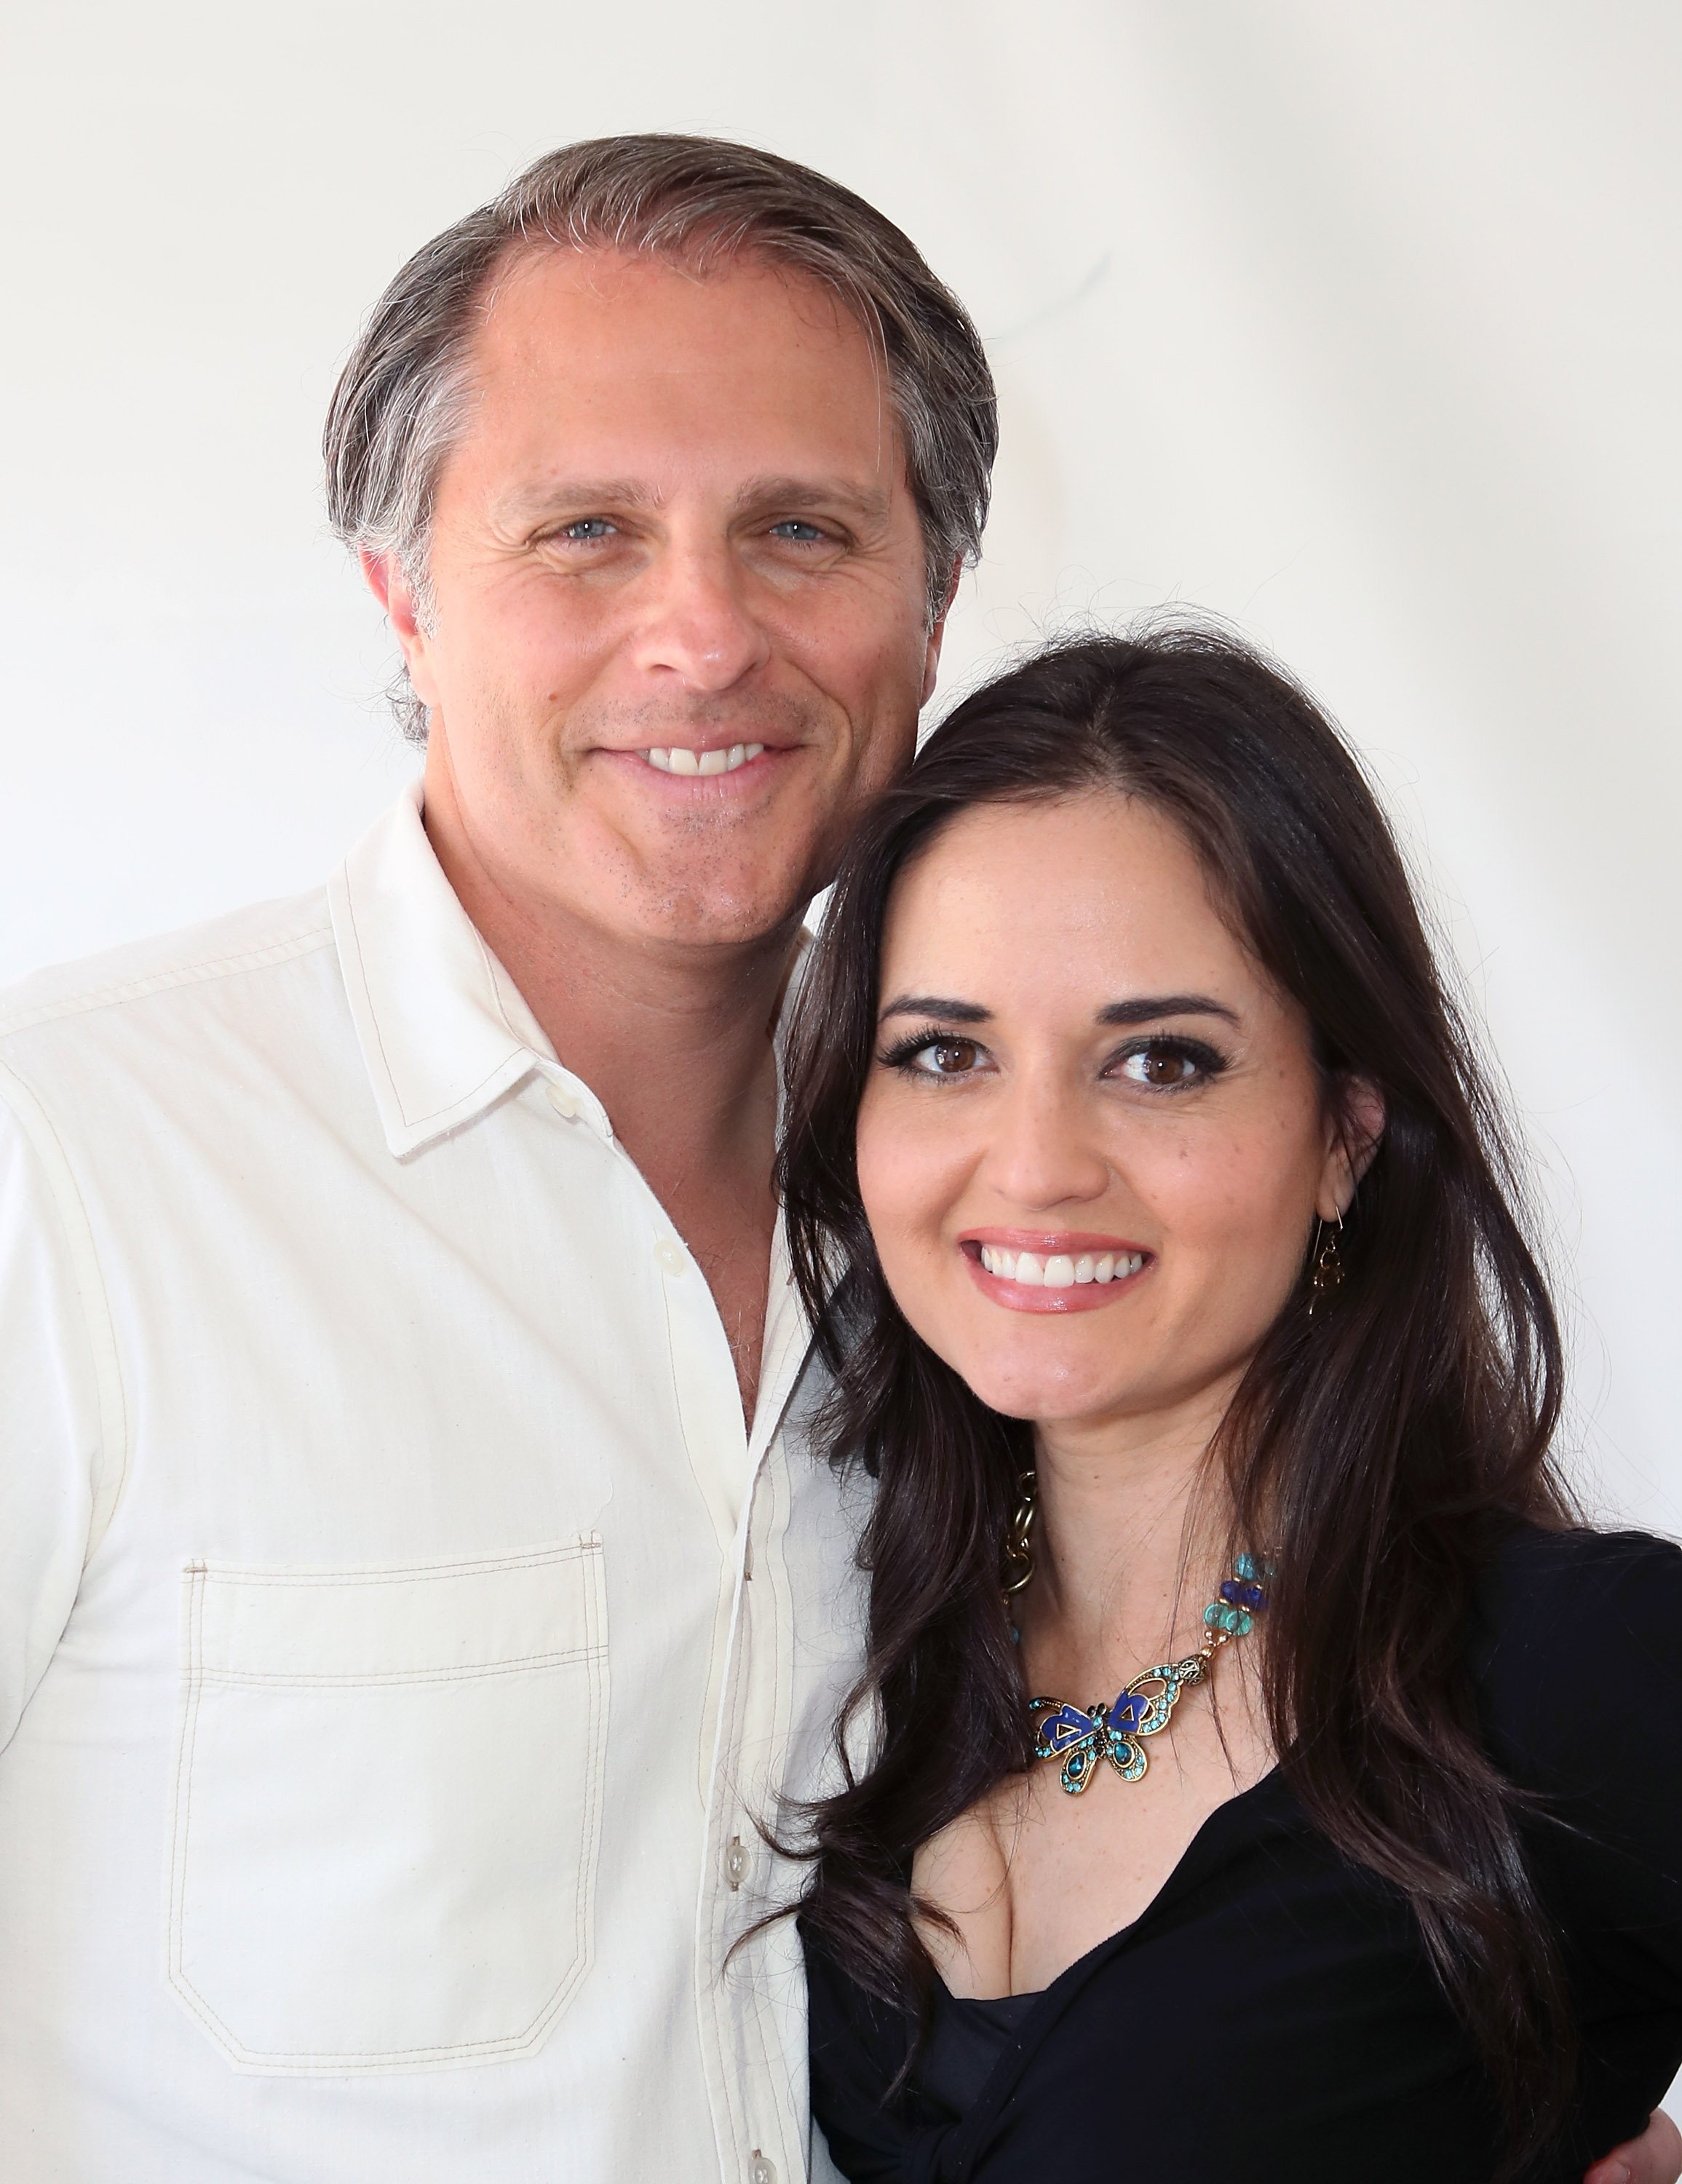 Danica McKellar and Scott Sveslosky pose for a photo at the 23rd LA Times Festival of Books at USC on April 21, 2018, in Los Angeles, California | Source: Getty Images